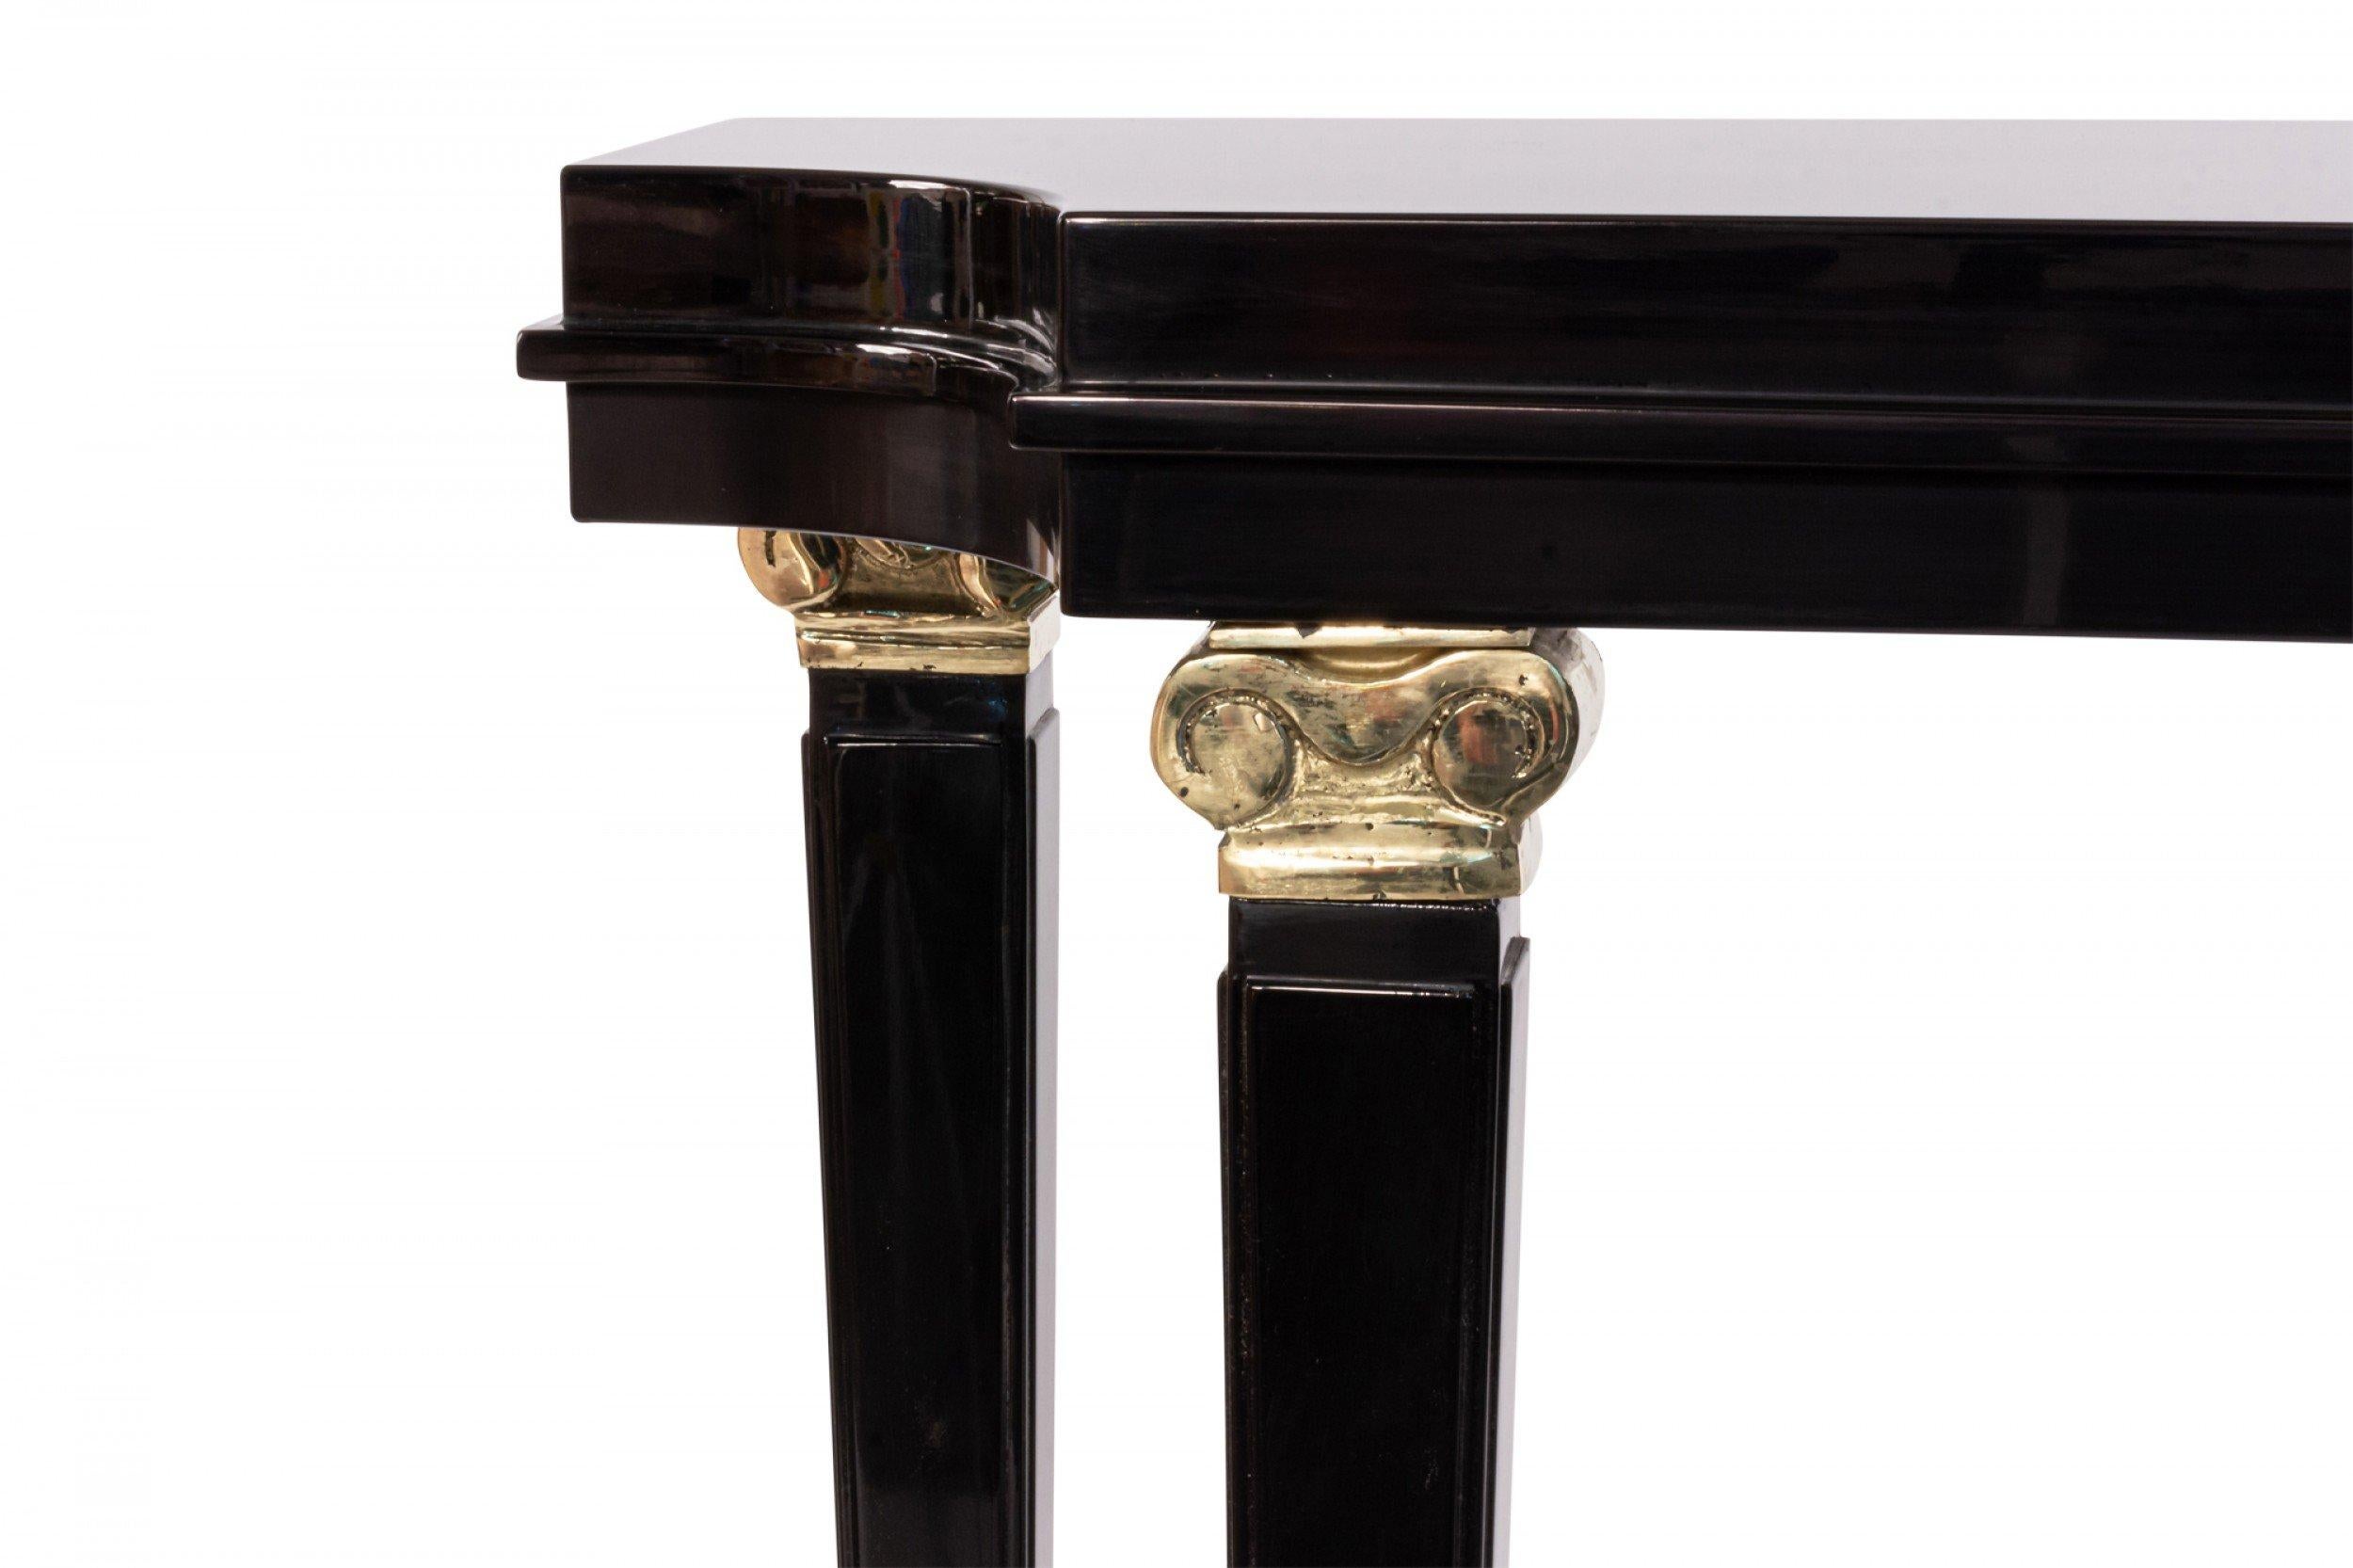 Contemporary French mid-century 1940s-style black lacquer shaped top console table with shelf and bronze capital trim on legs (made to order, custom size and color available).
     